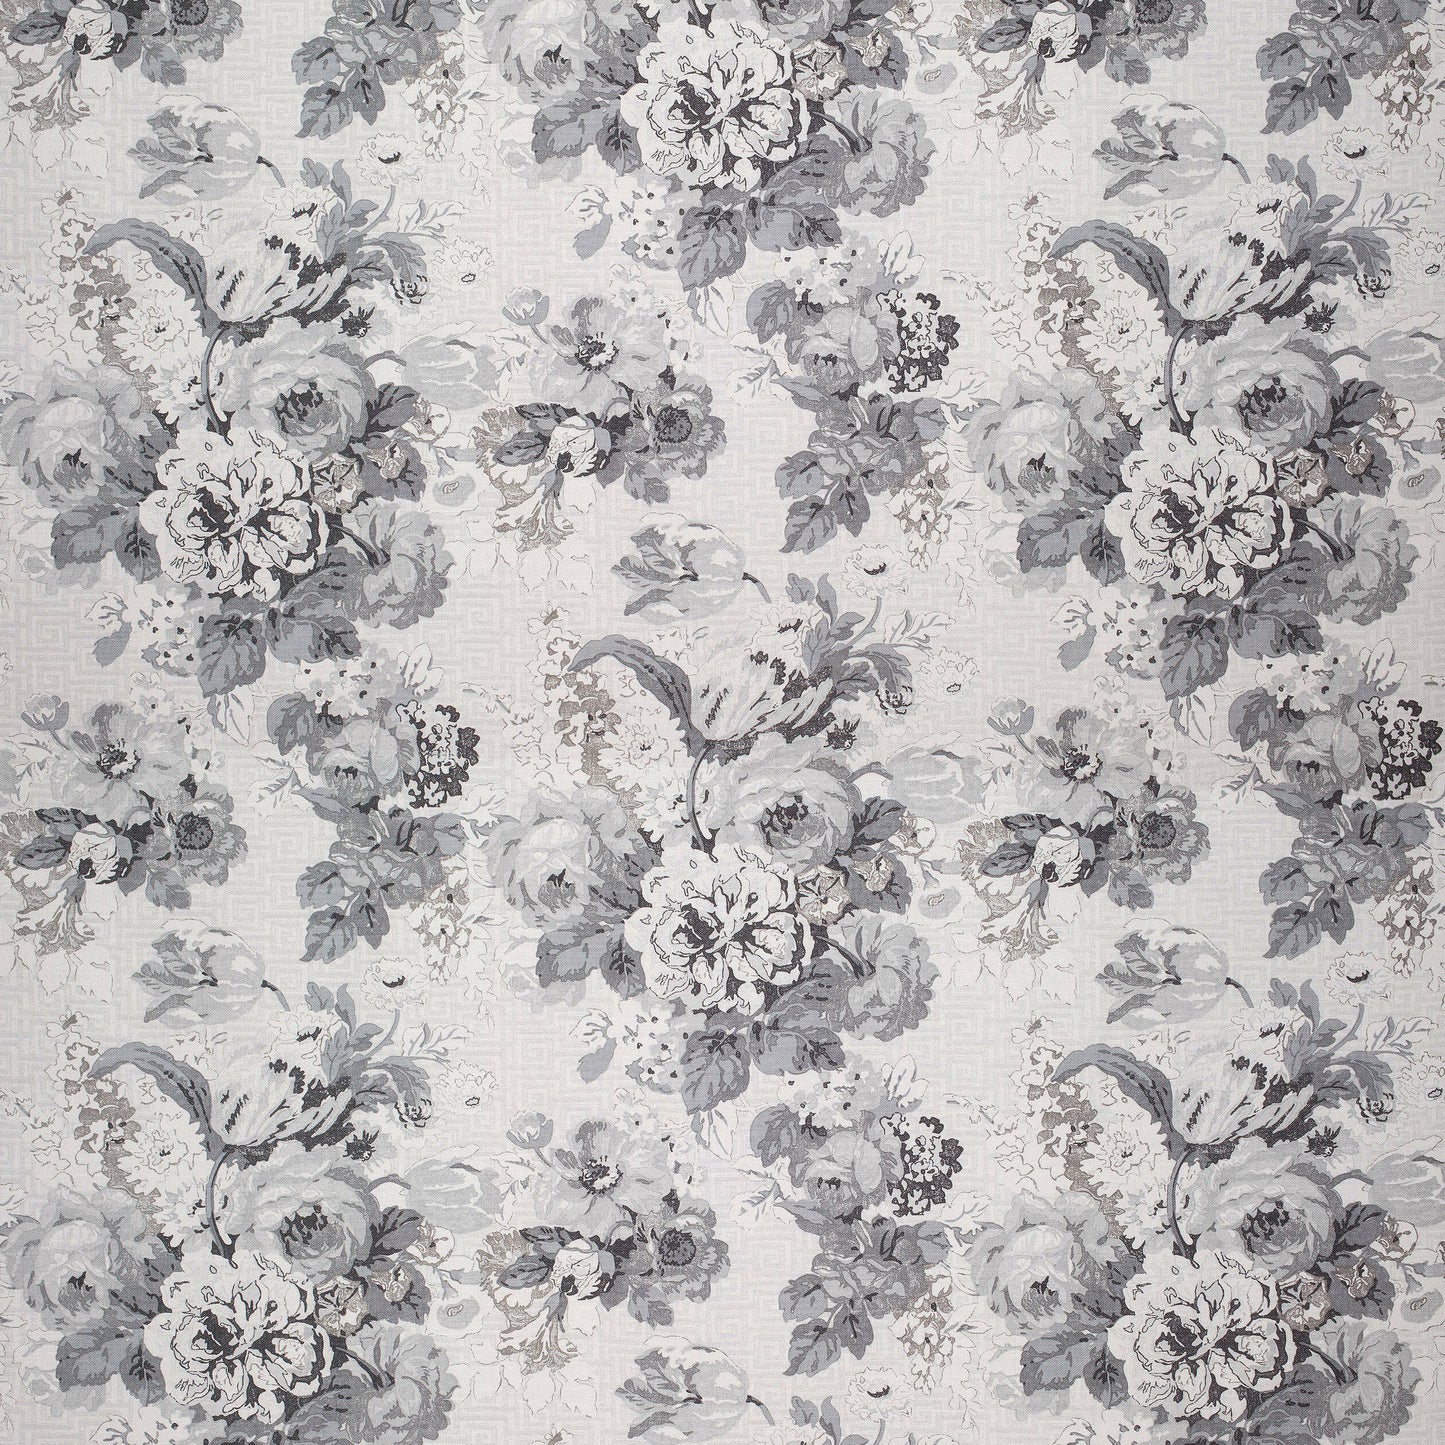 Purchase  Ann French Fabric Pattern# AF26135  pattern name  Wild Floral